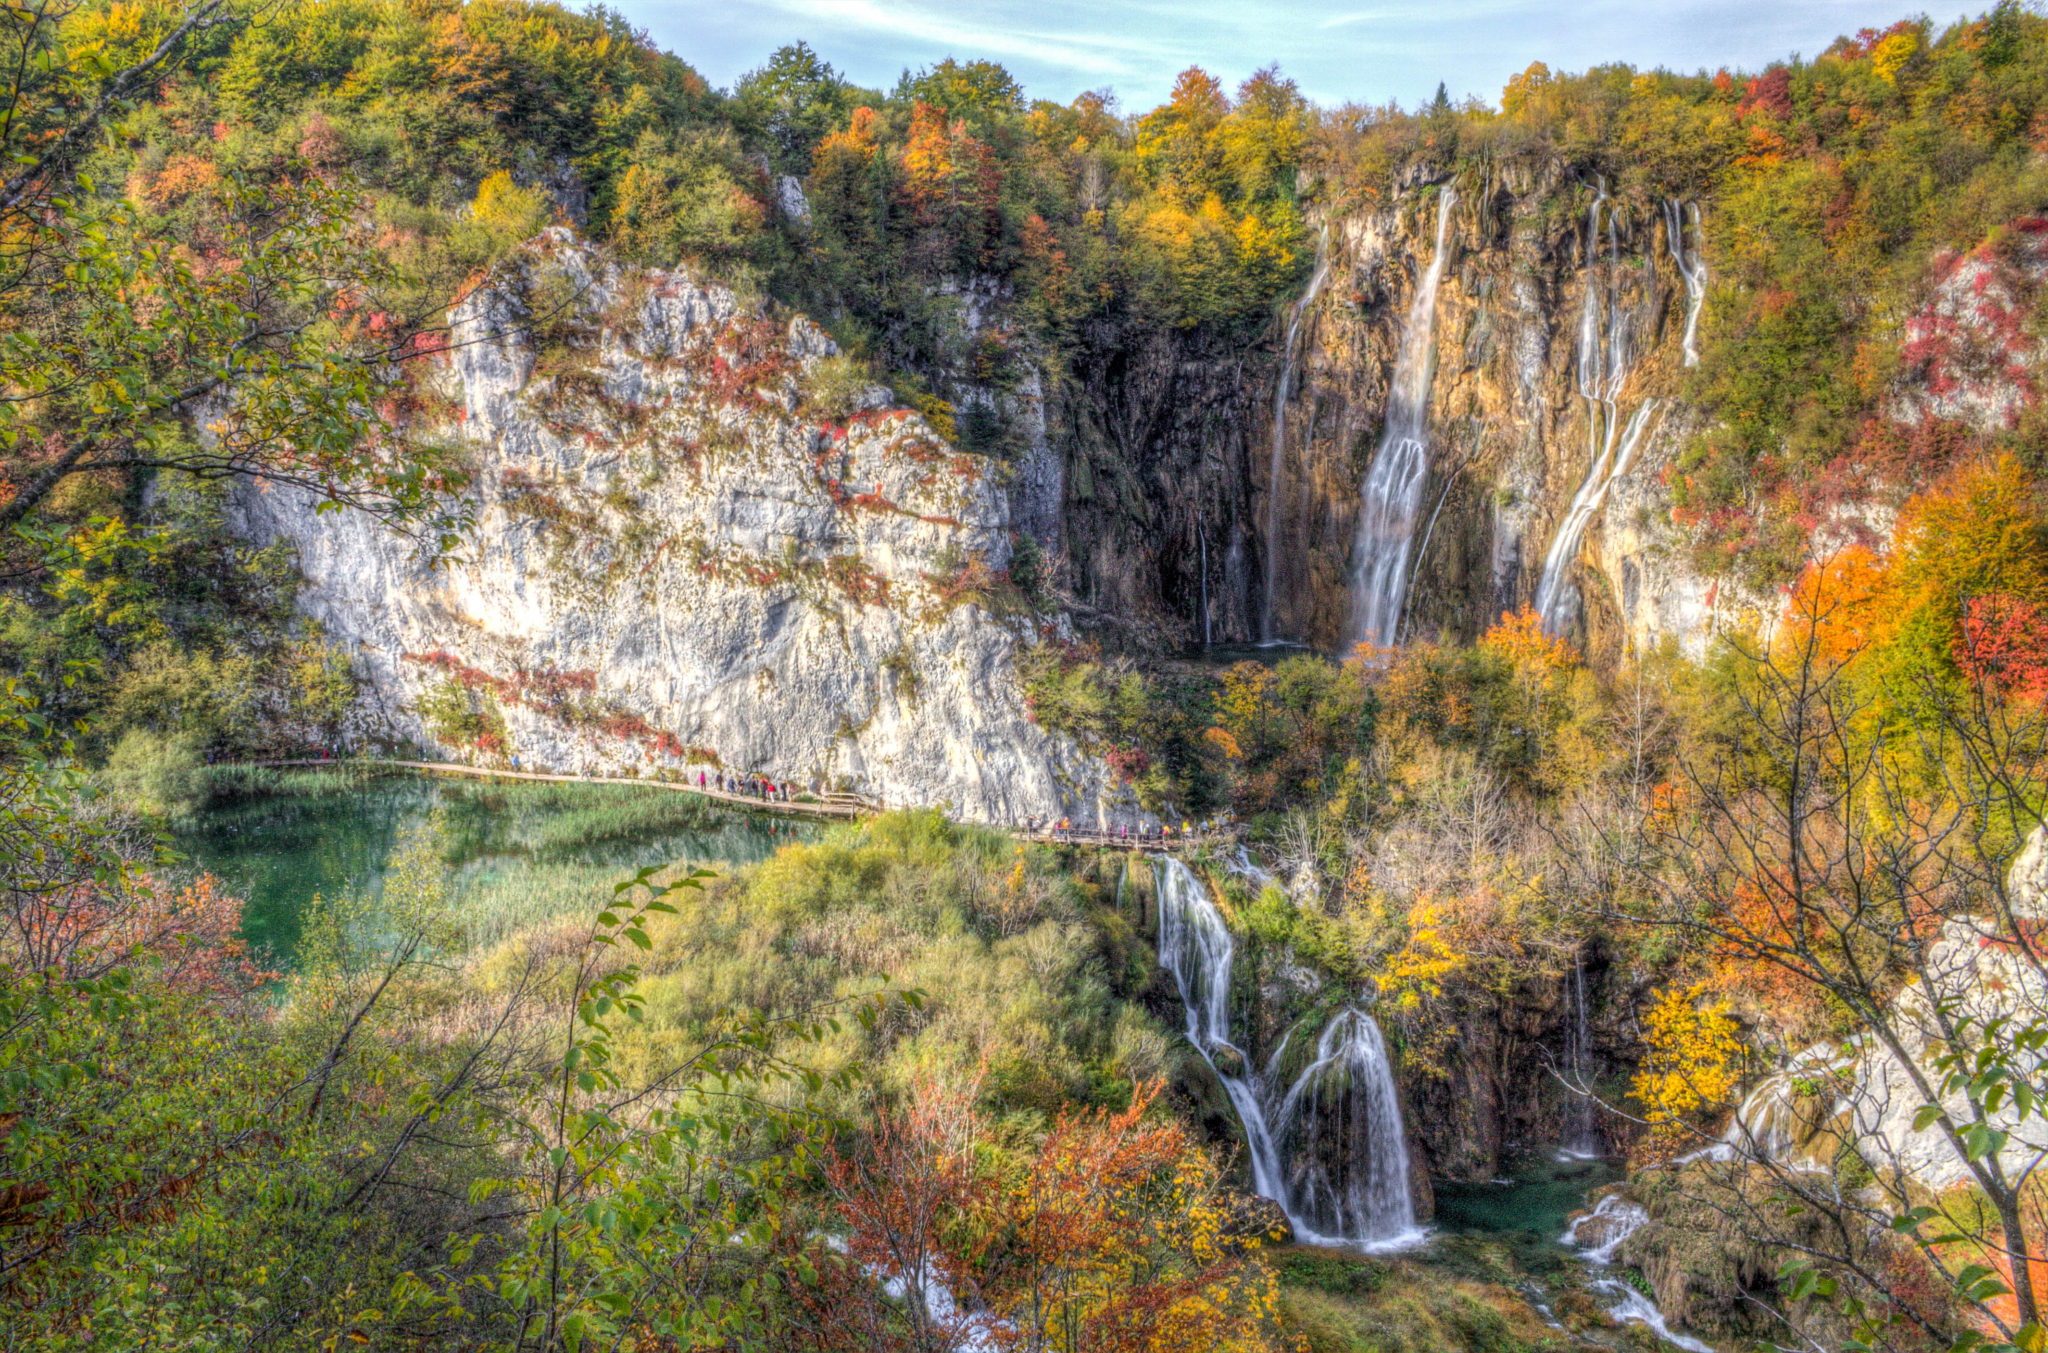 Plitvice Lakes in a must visit destination for any Croatia itinerary, this UNESCO site belongs on every bucketlist